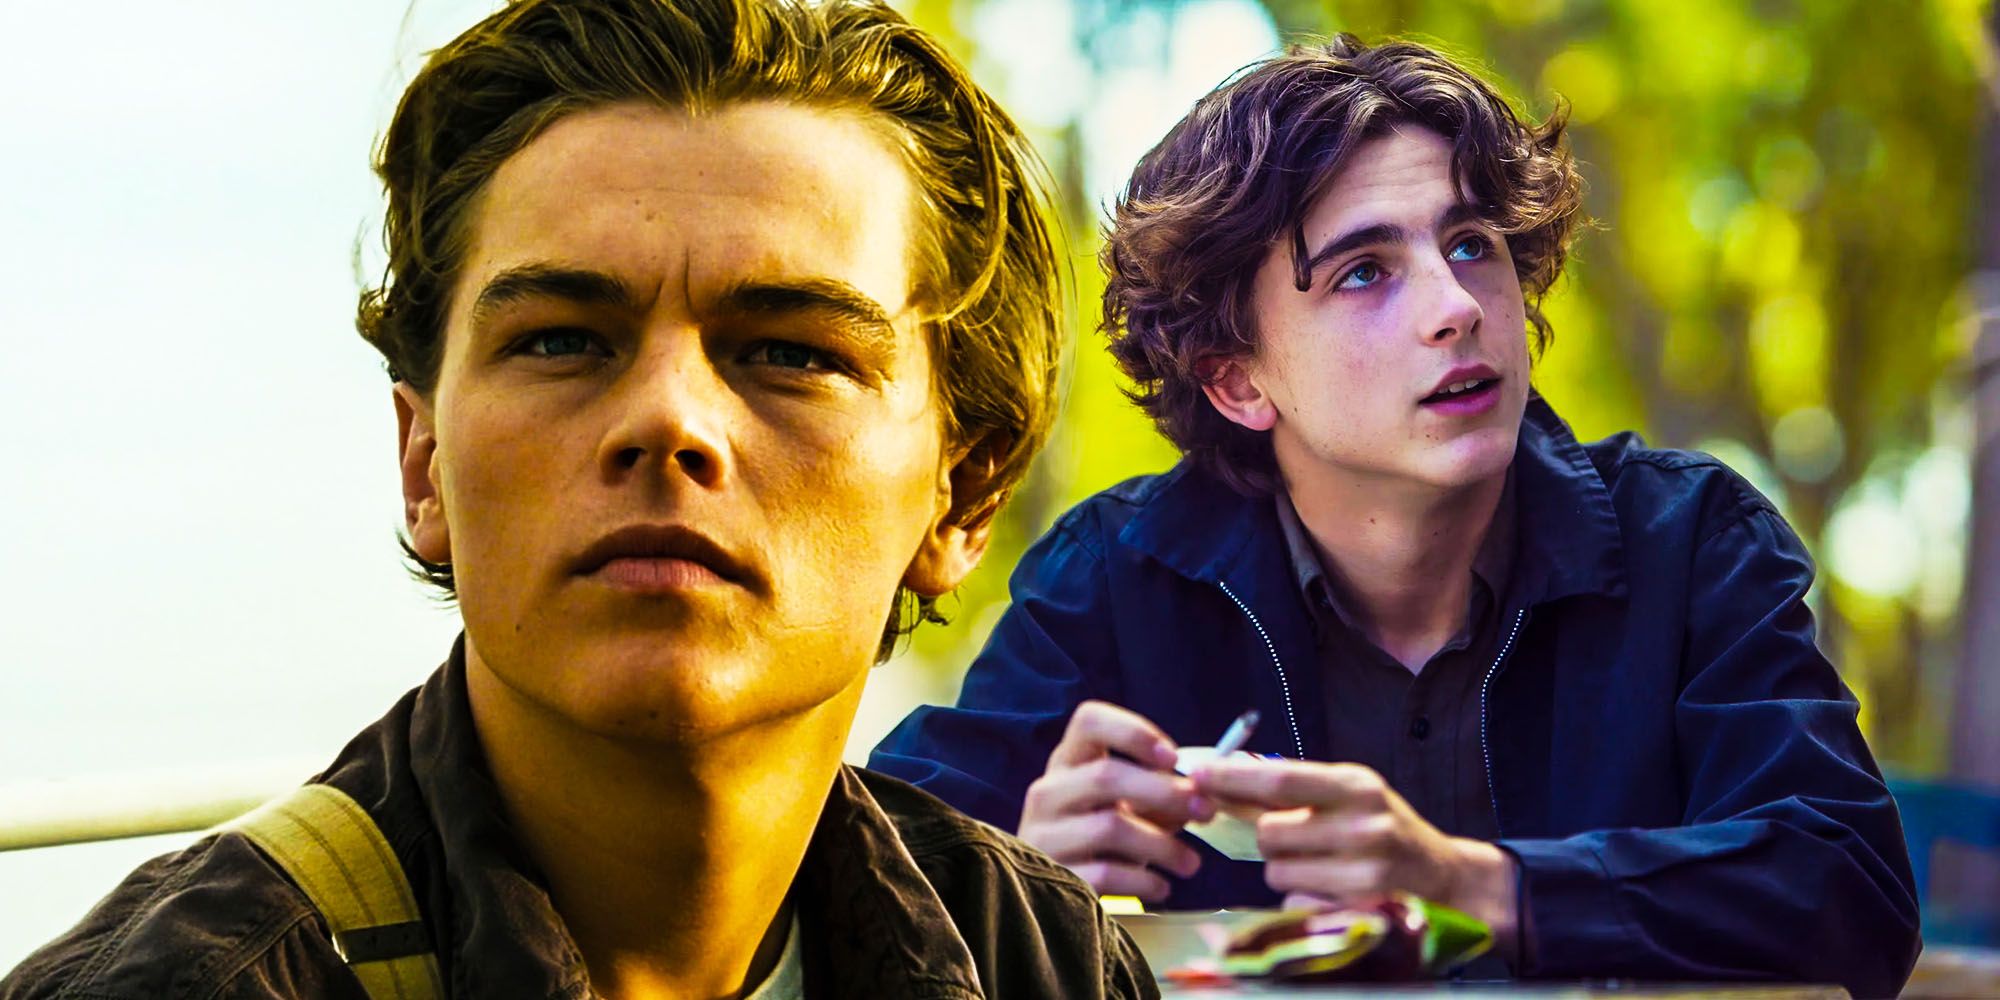 Why Timothee Chalamet Is The Next Leonardo DiCaprio